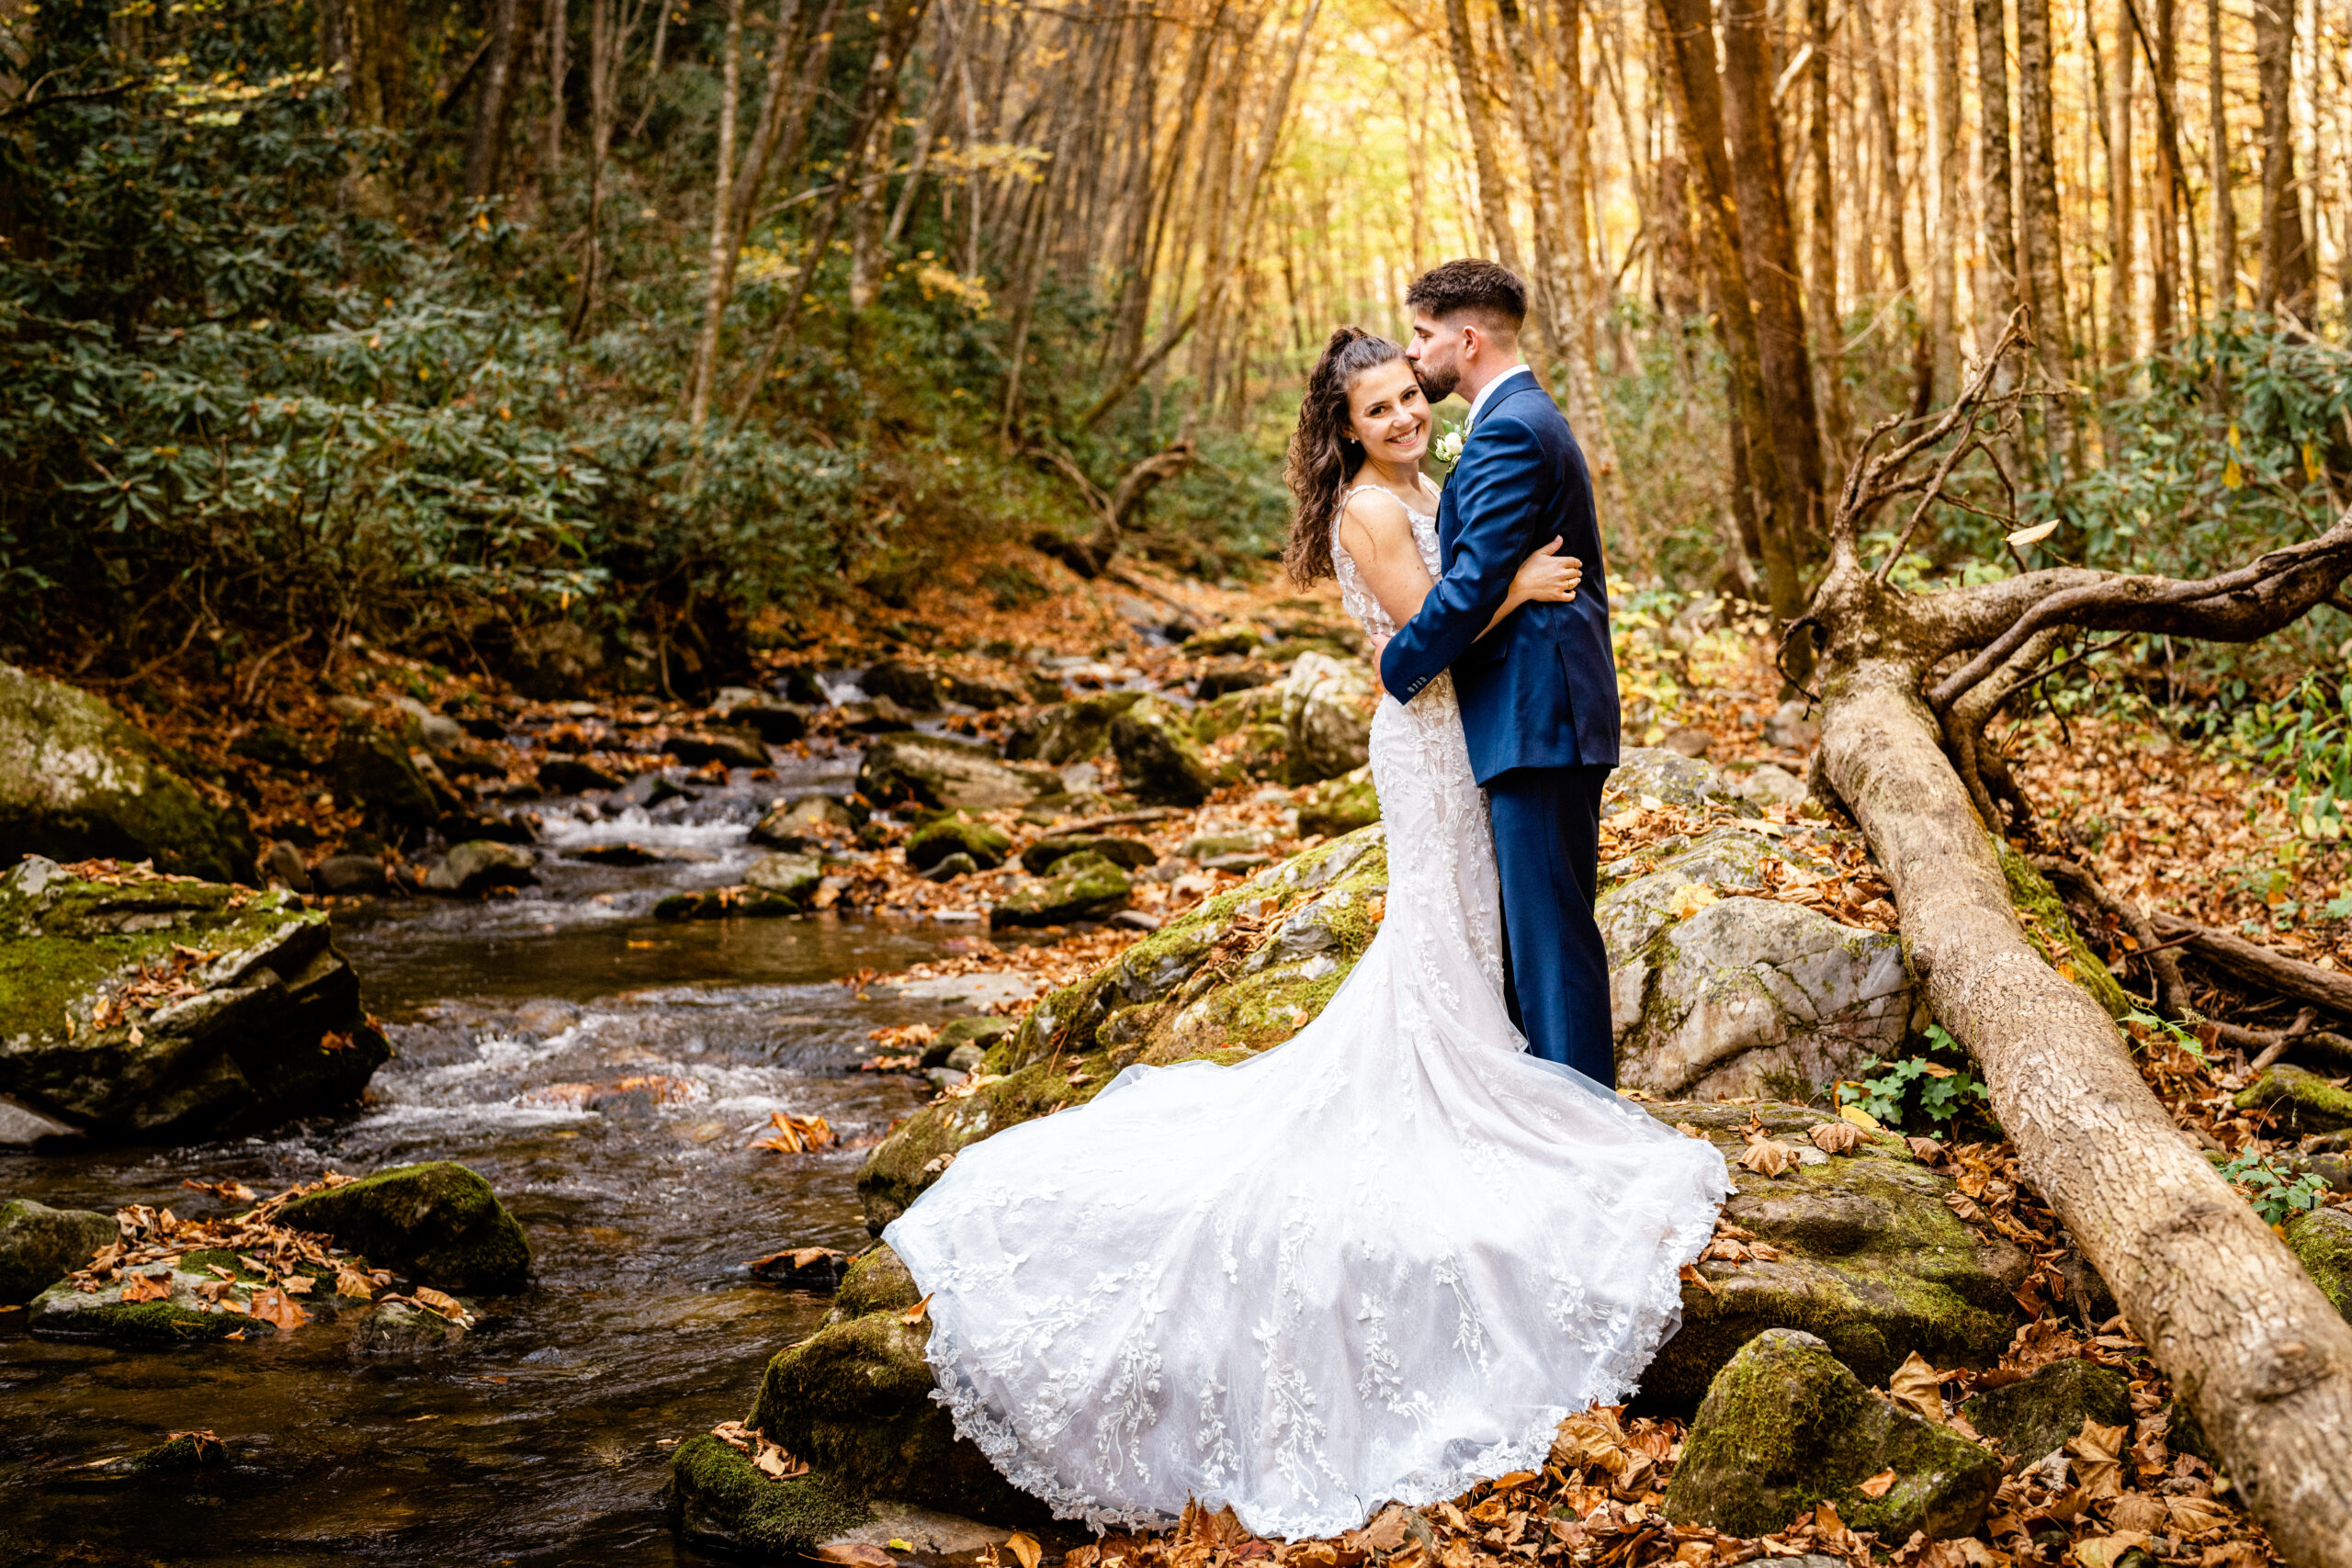 Bride and Groom embrace on a rock in the middle of a beautiful creek during fall